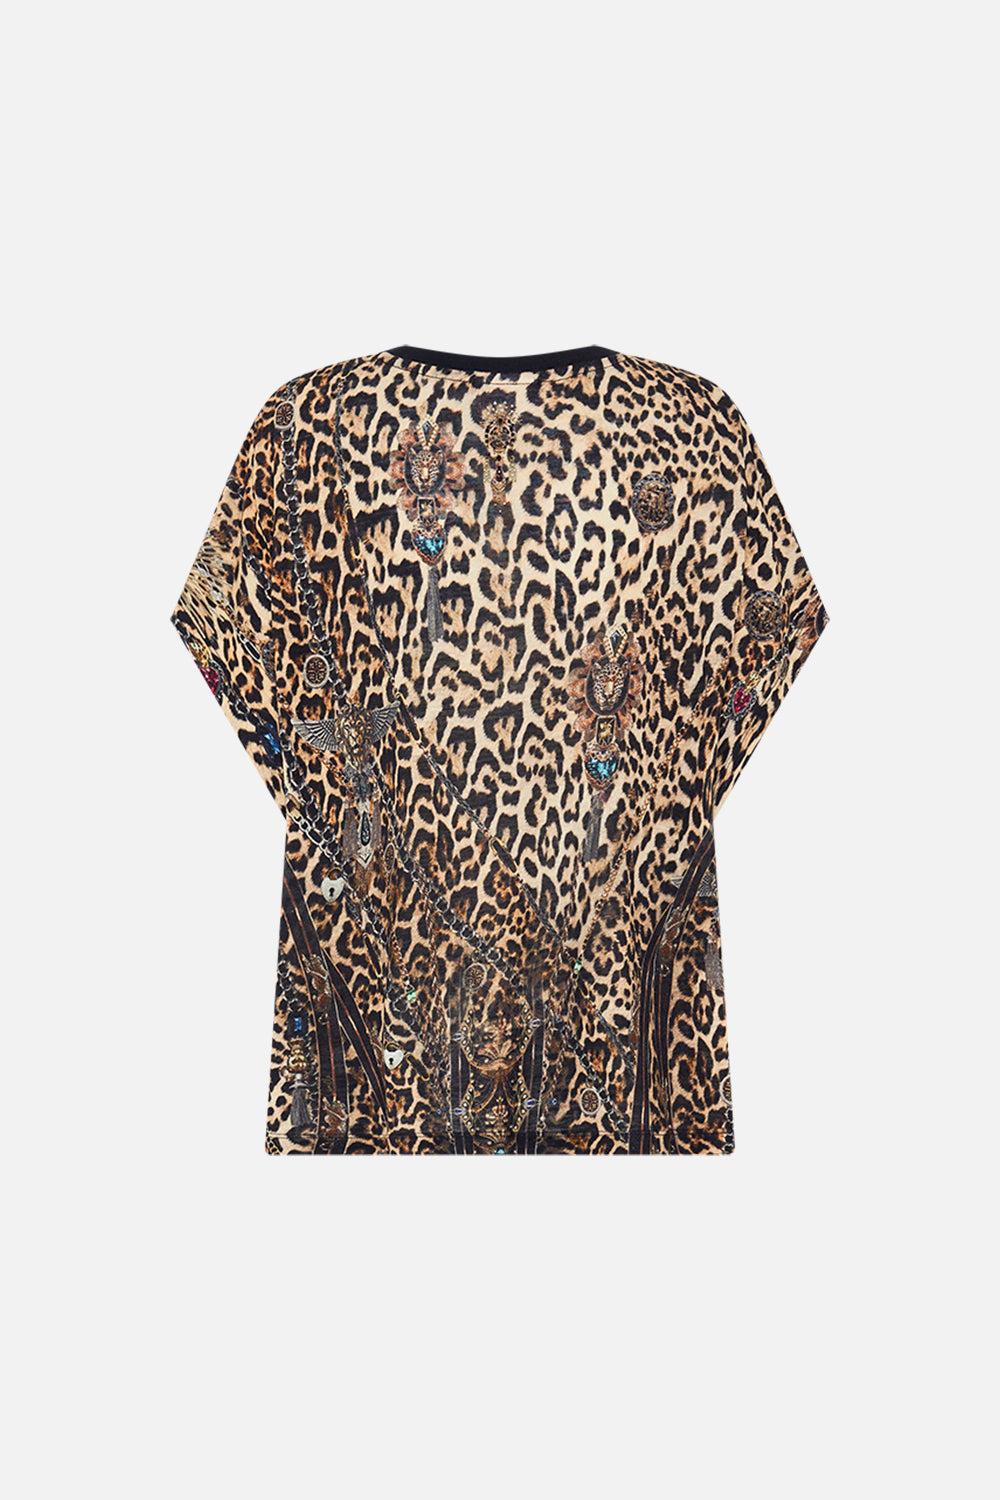 CAMILLA leopard t-shirt with dropped armhole in Amsterglam print.